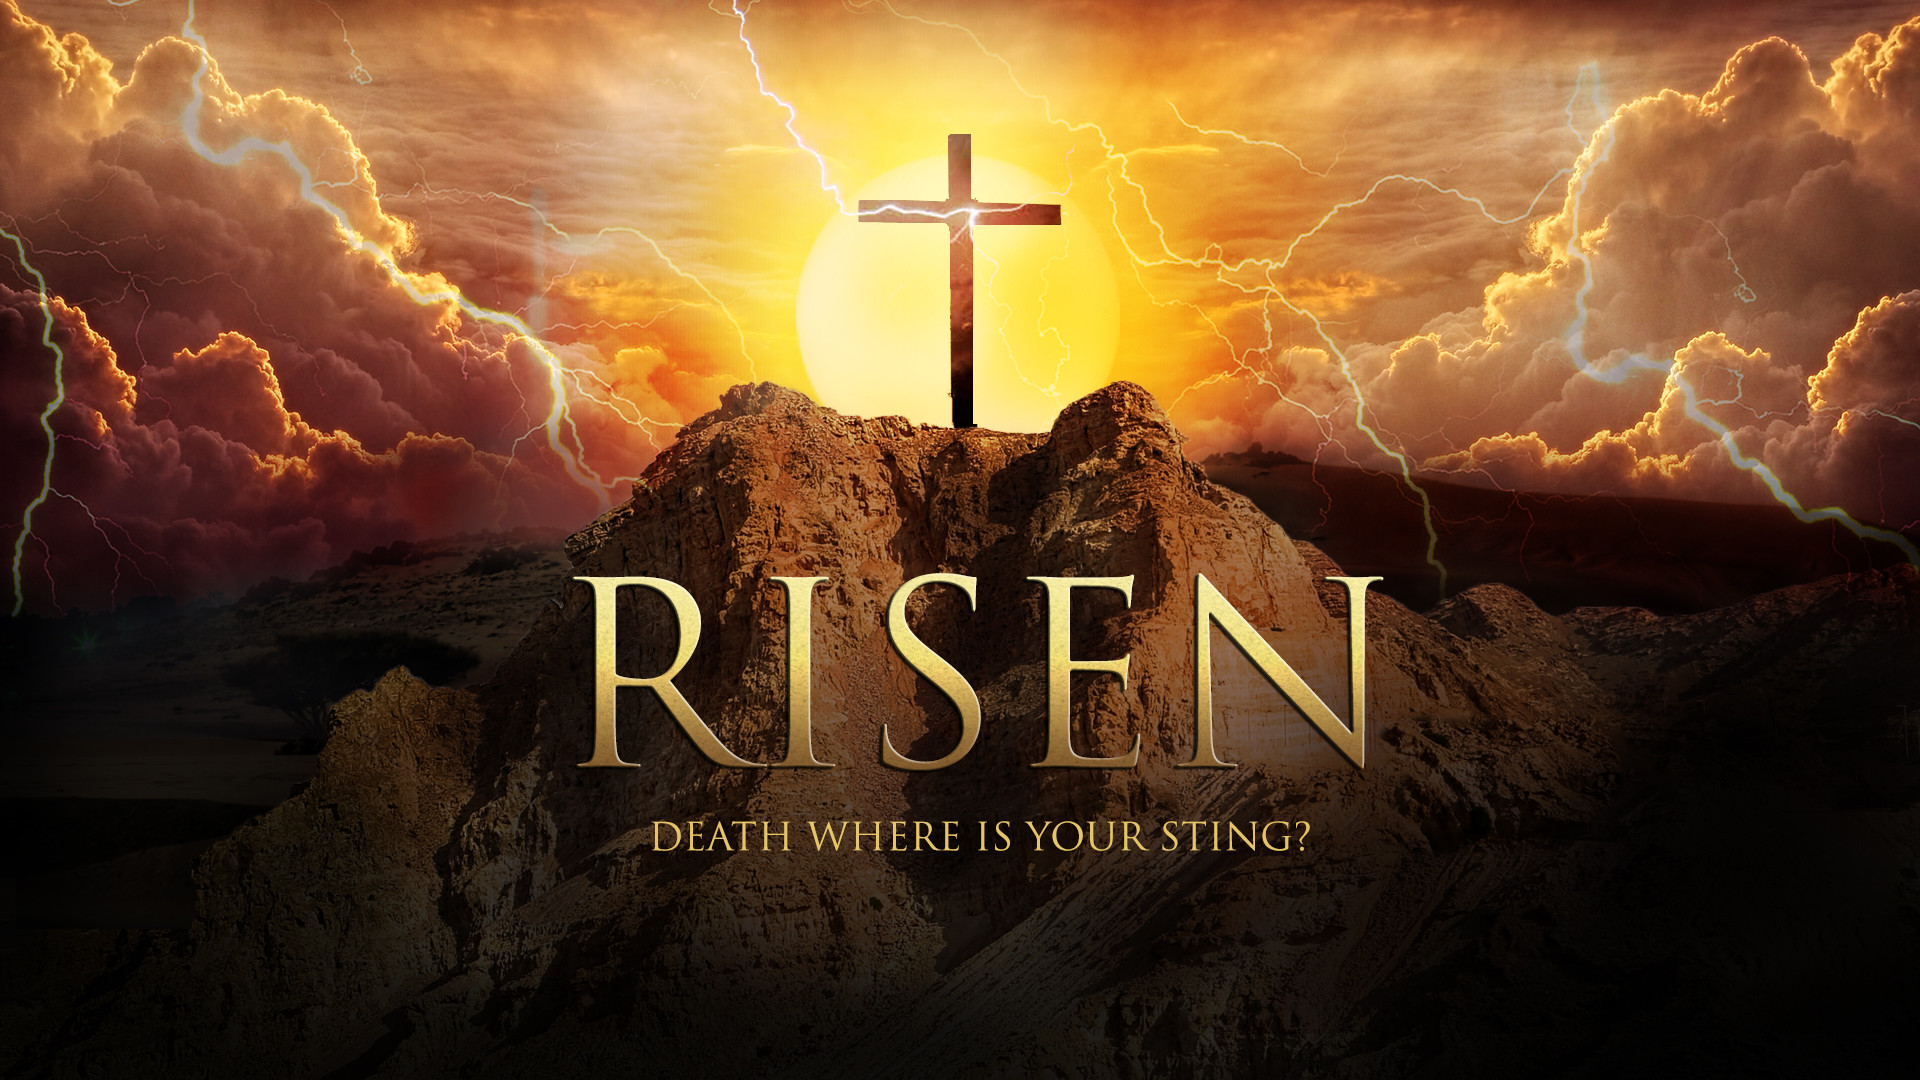 Jesus Christ Our Lord is Risen